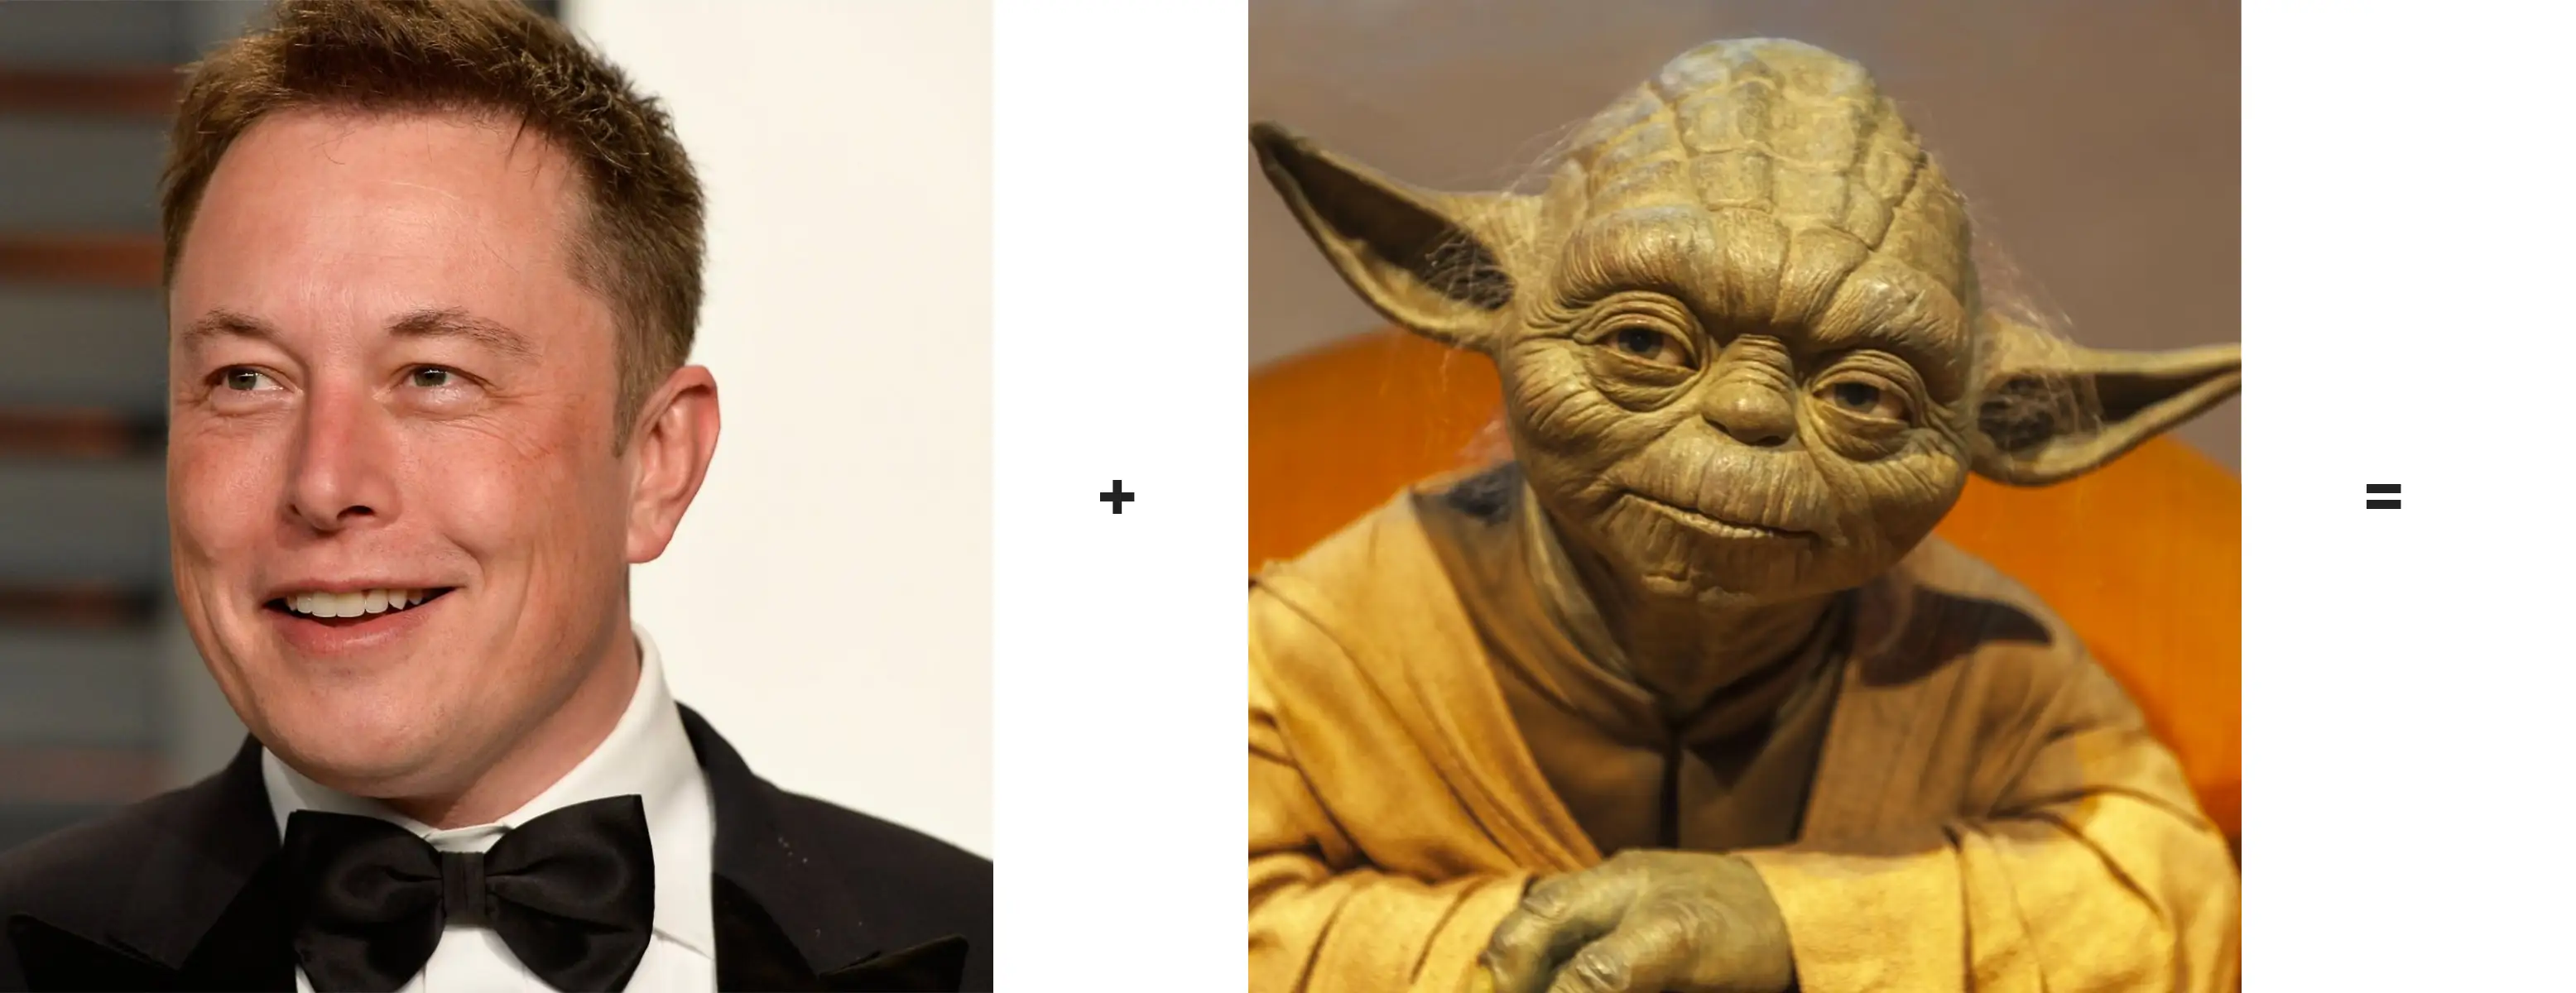 Image of elon musk and yoda with a + between them